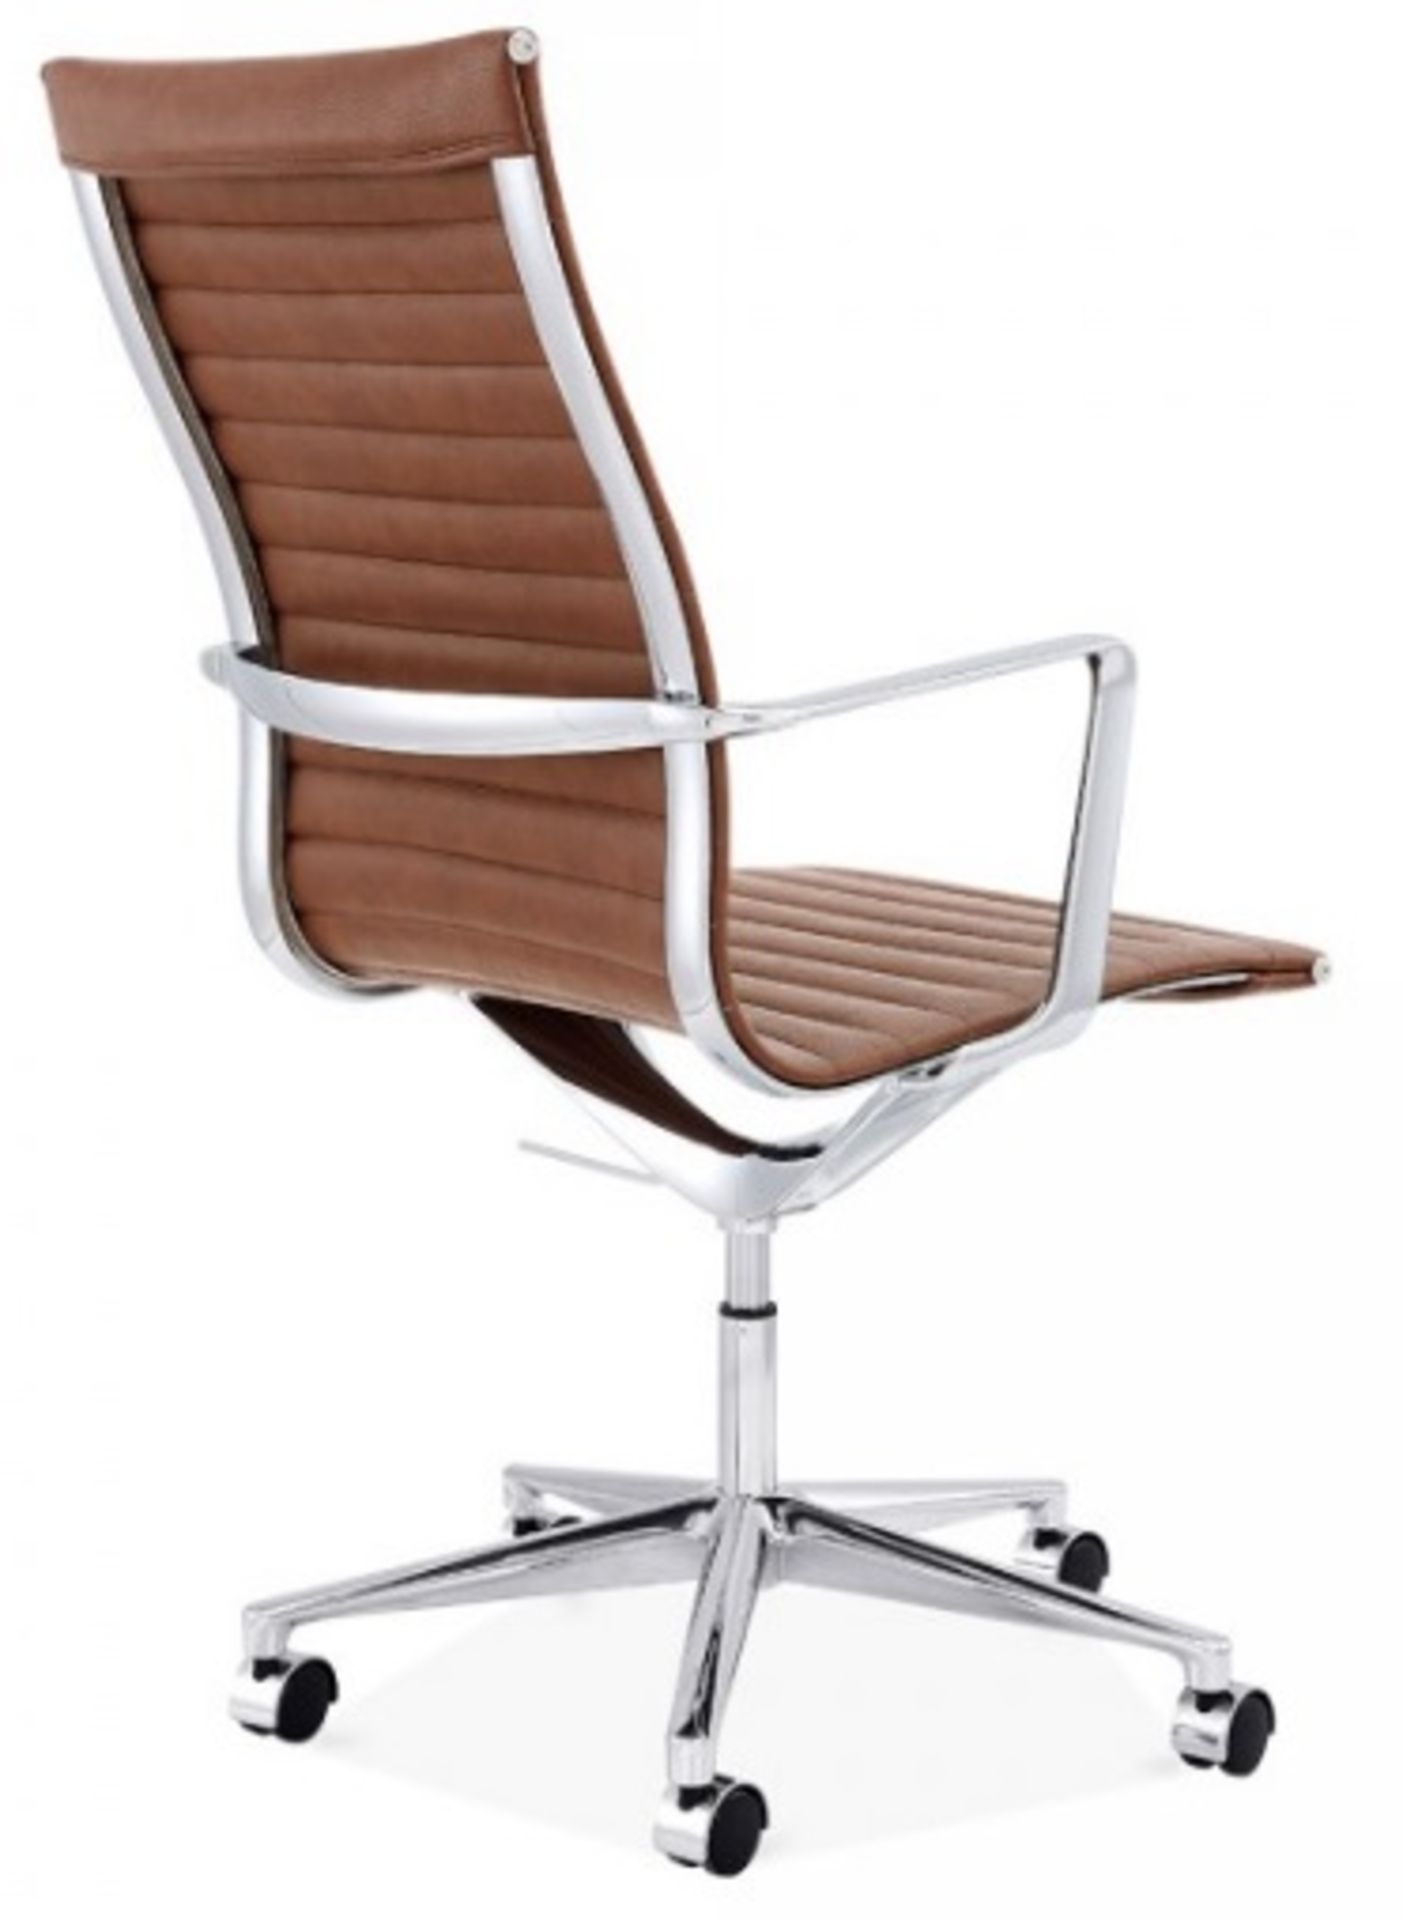 1 x LINEAR Eames-Inspired Ribbed High Back Office Swivel Chair In Brown Leather- New / Unboxed Stock - Image 4 of 5